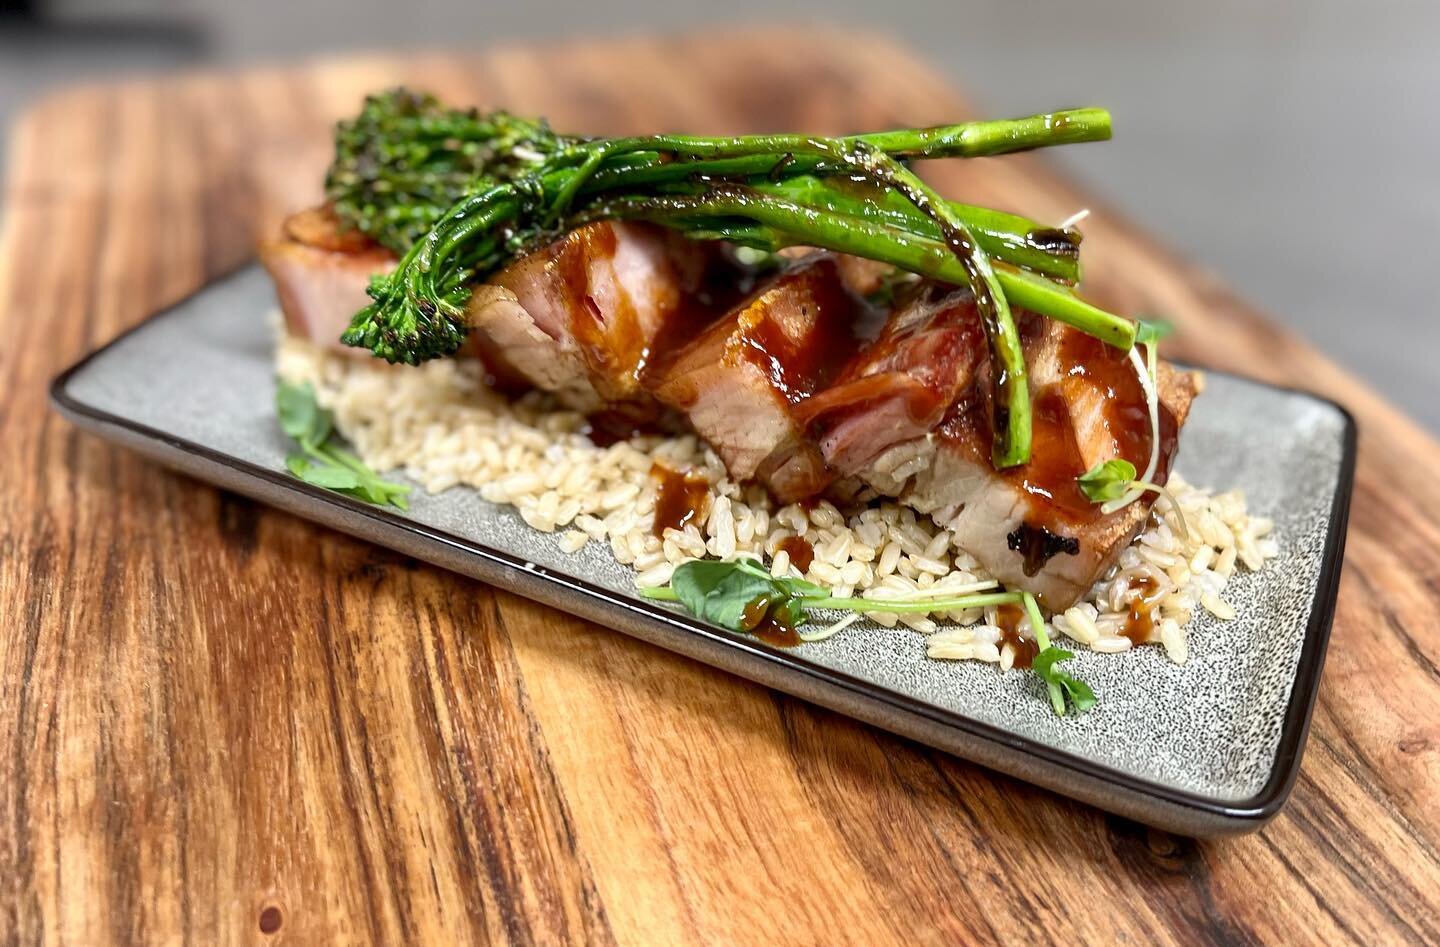 House smoked sticky  BBQ pork belly served on a bed of brown rice, bourbon BBQ sauce, pickled onion and grilled broccolini #bbqporkbelly #bbq #lunch #lunchwithview #yum #barringtoncoast #forstertuncurry #thedeckattuncurry